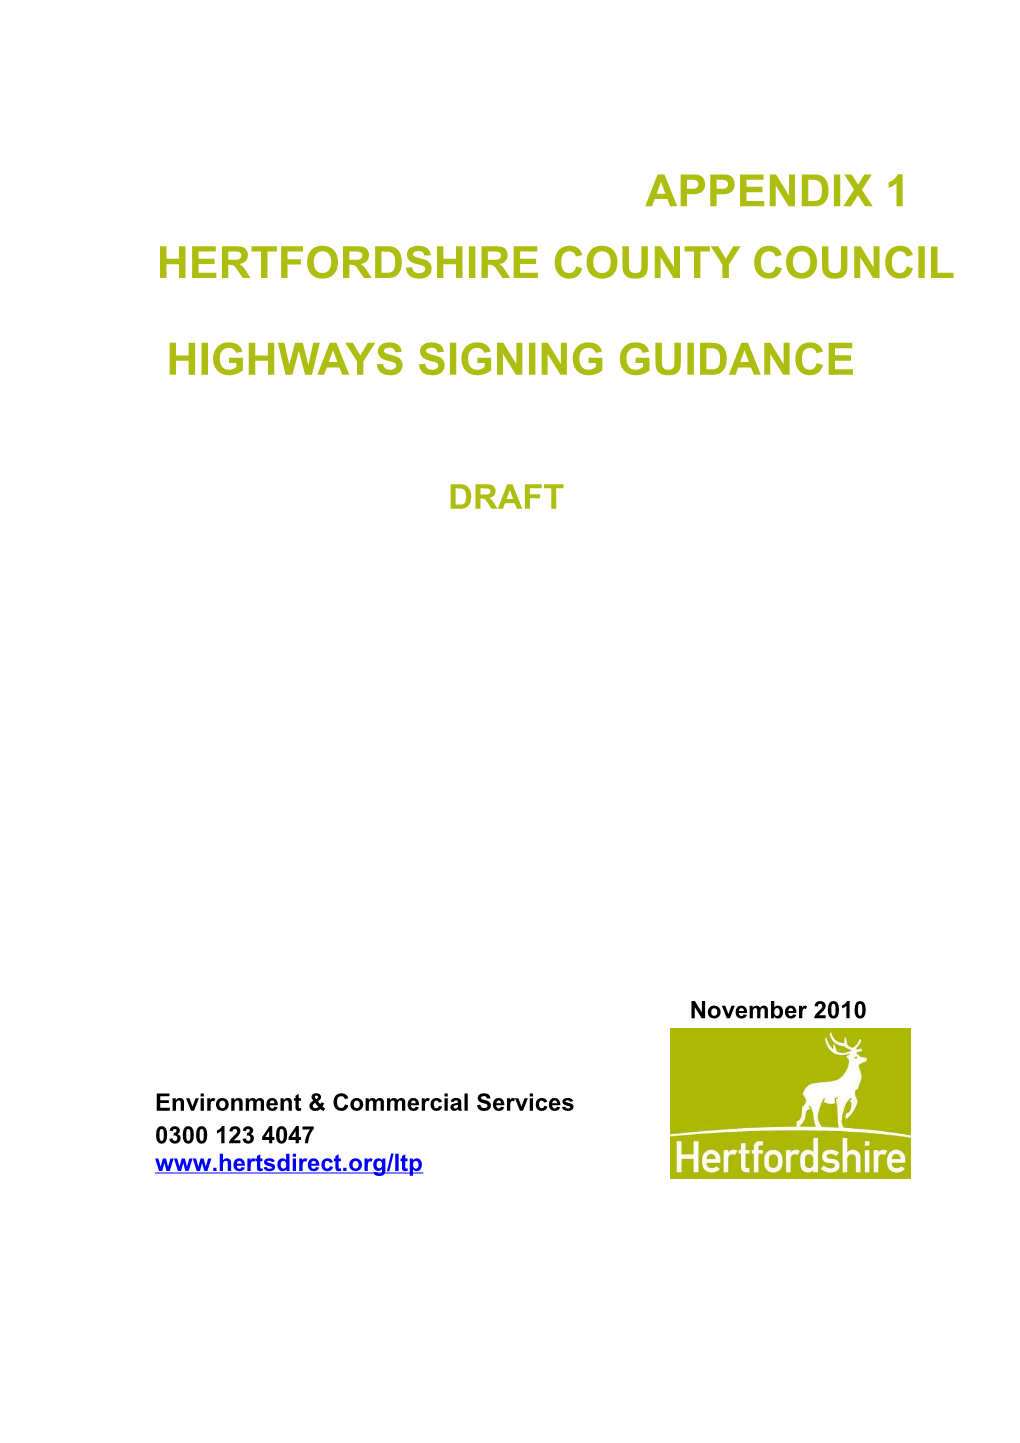 Hertfordshire County Council Highways